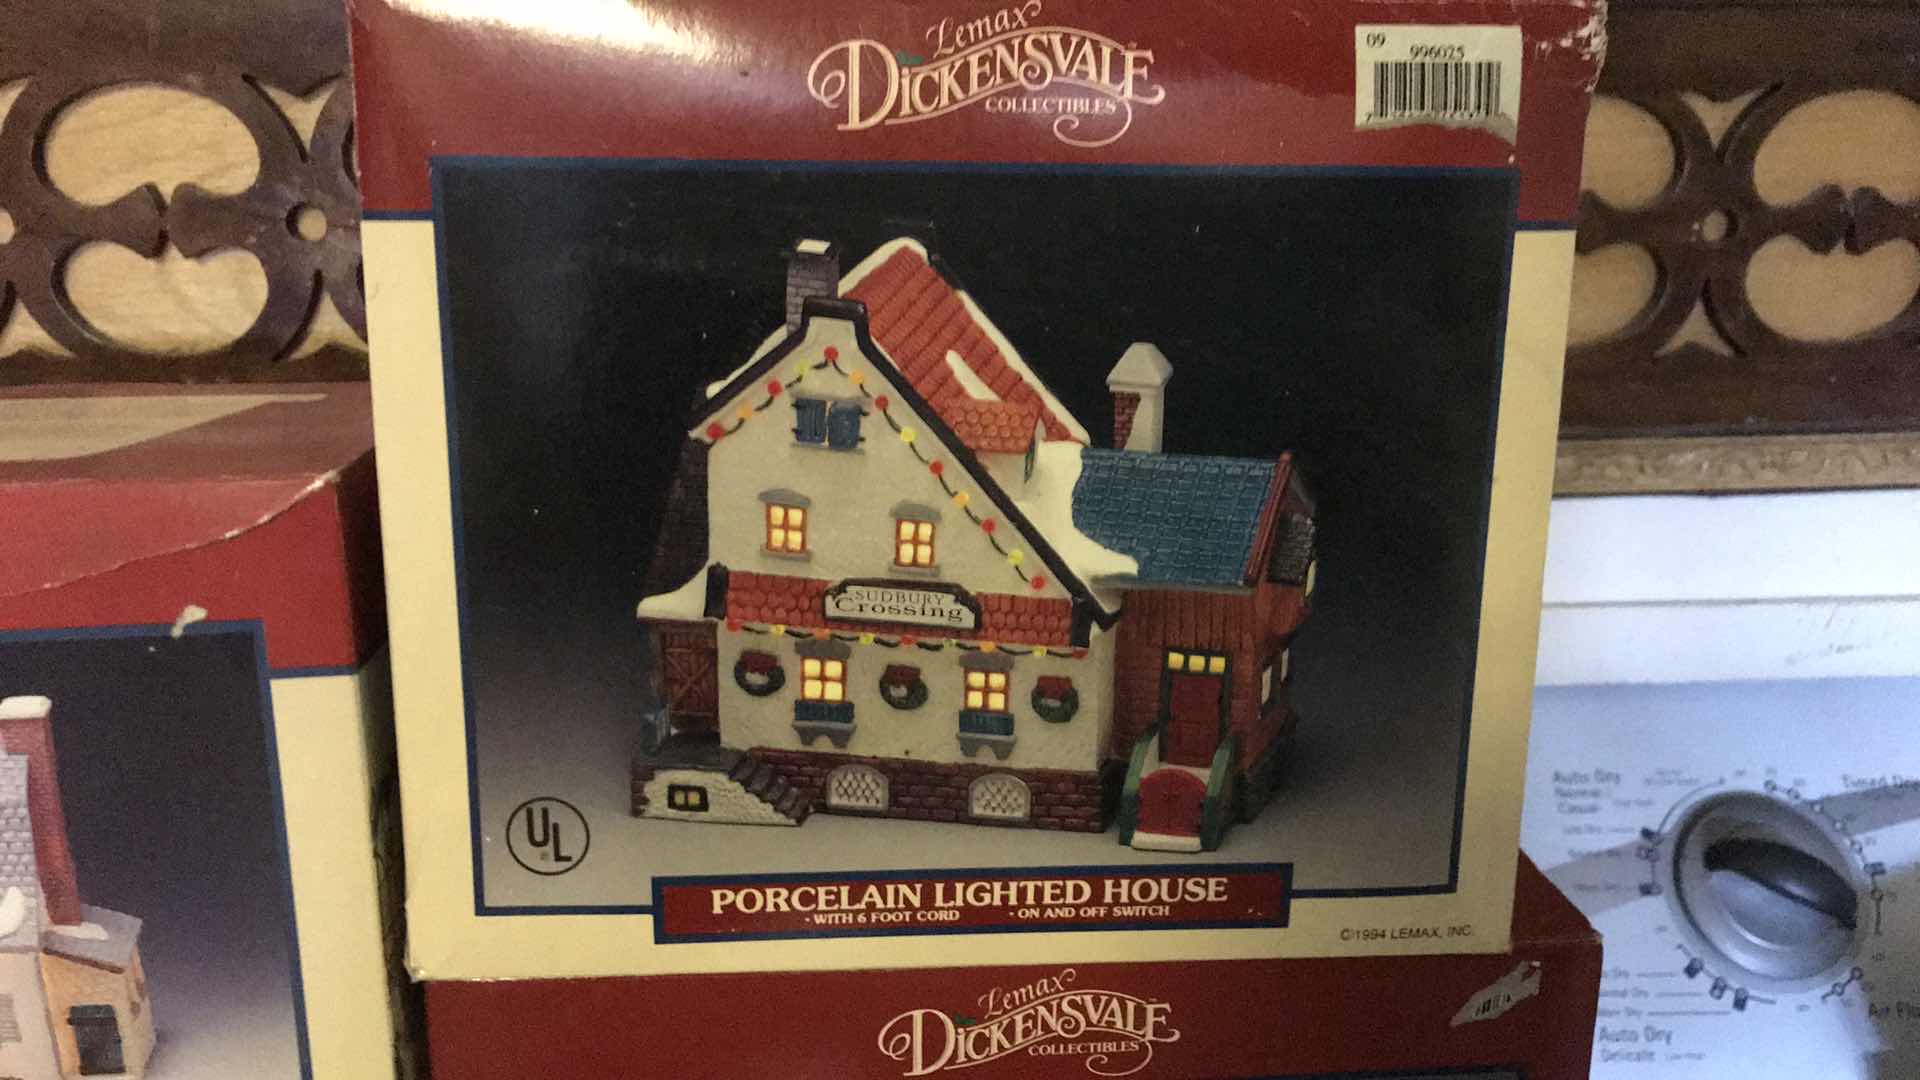 Photo 3 of LEMAX DICKENSVALE COLLECTABLES PORCELAIN LIGHTED HOUSES AND BRICK WALL